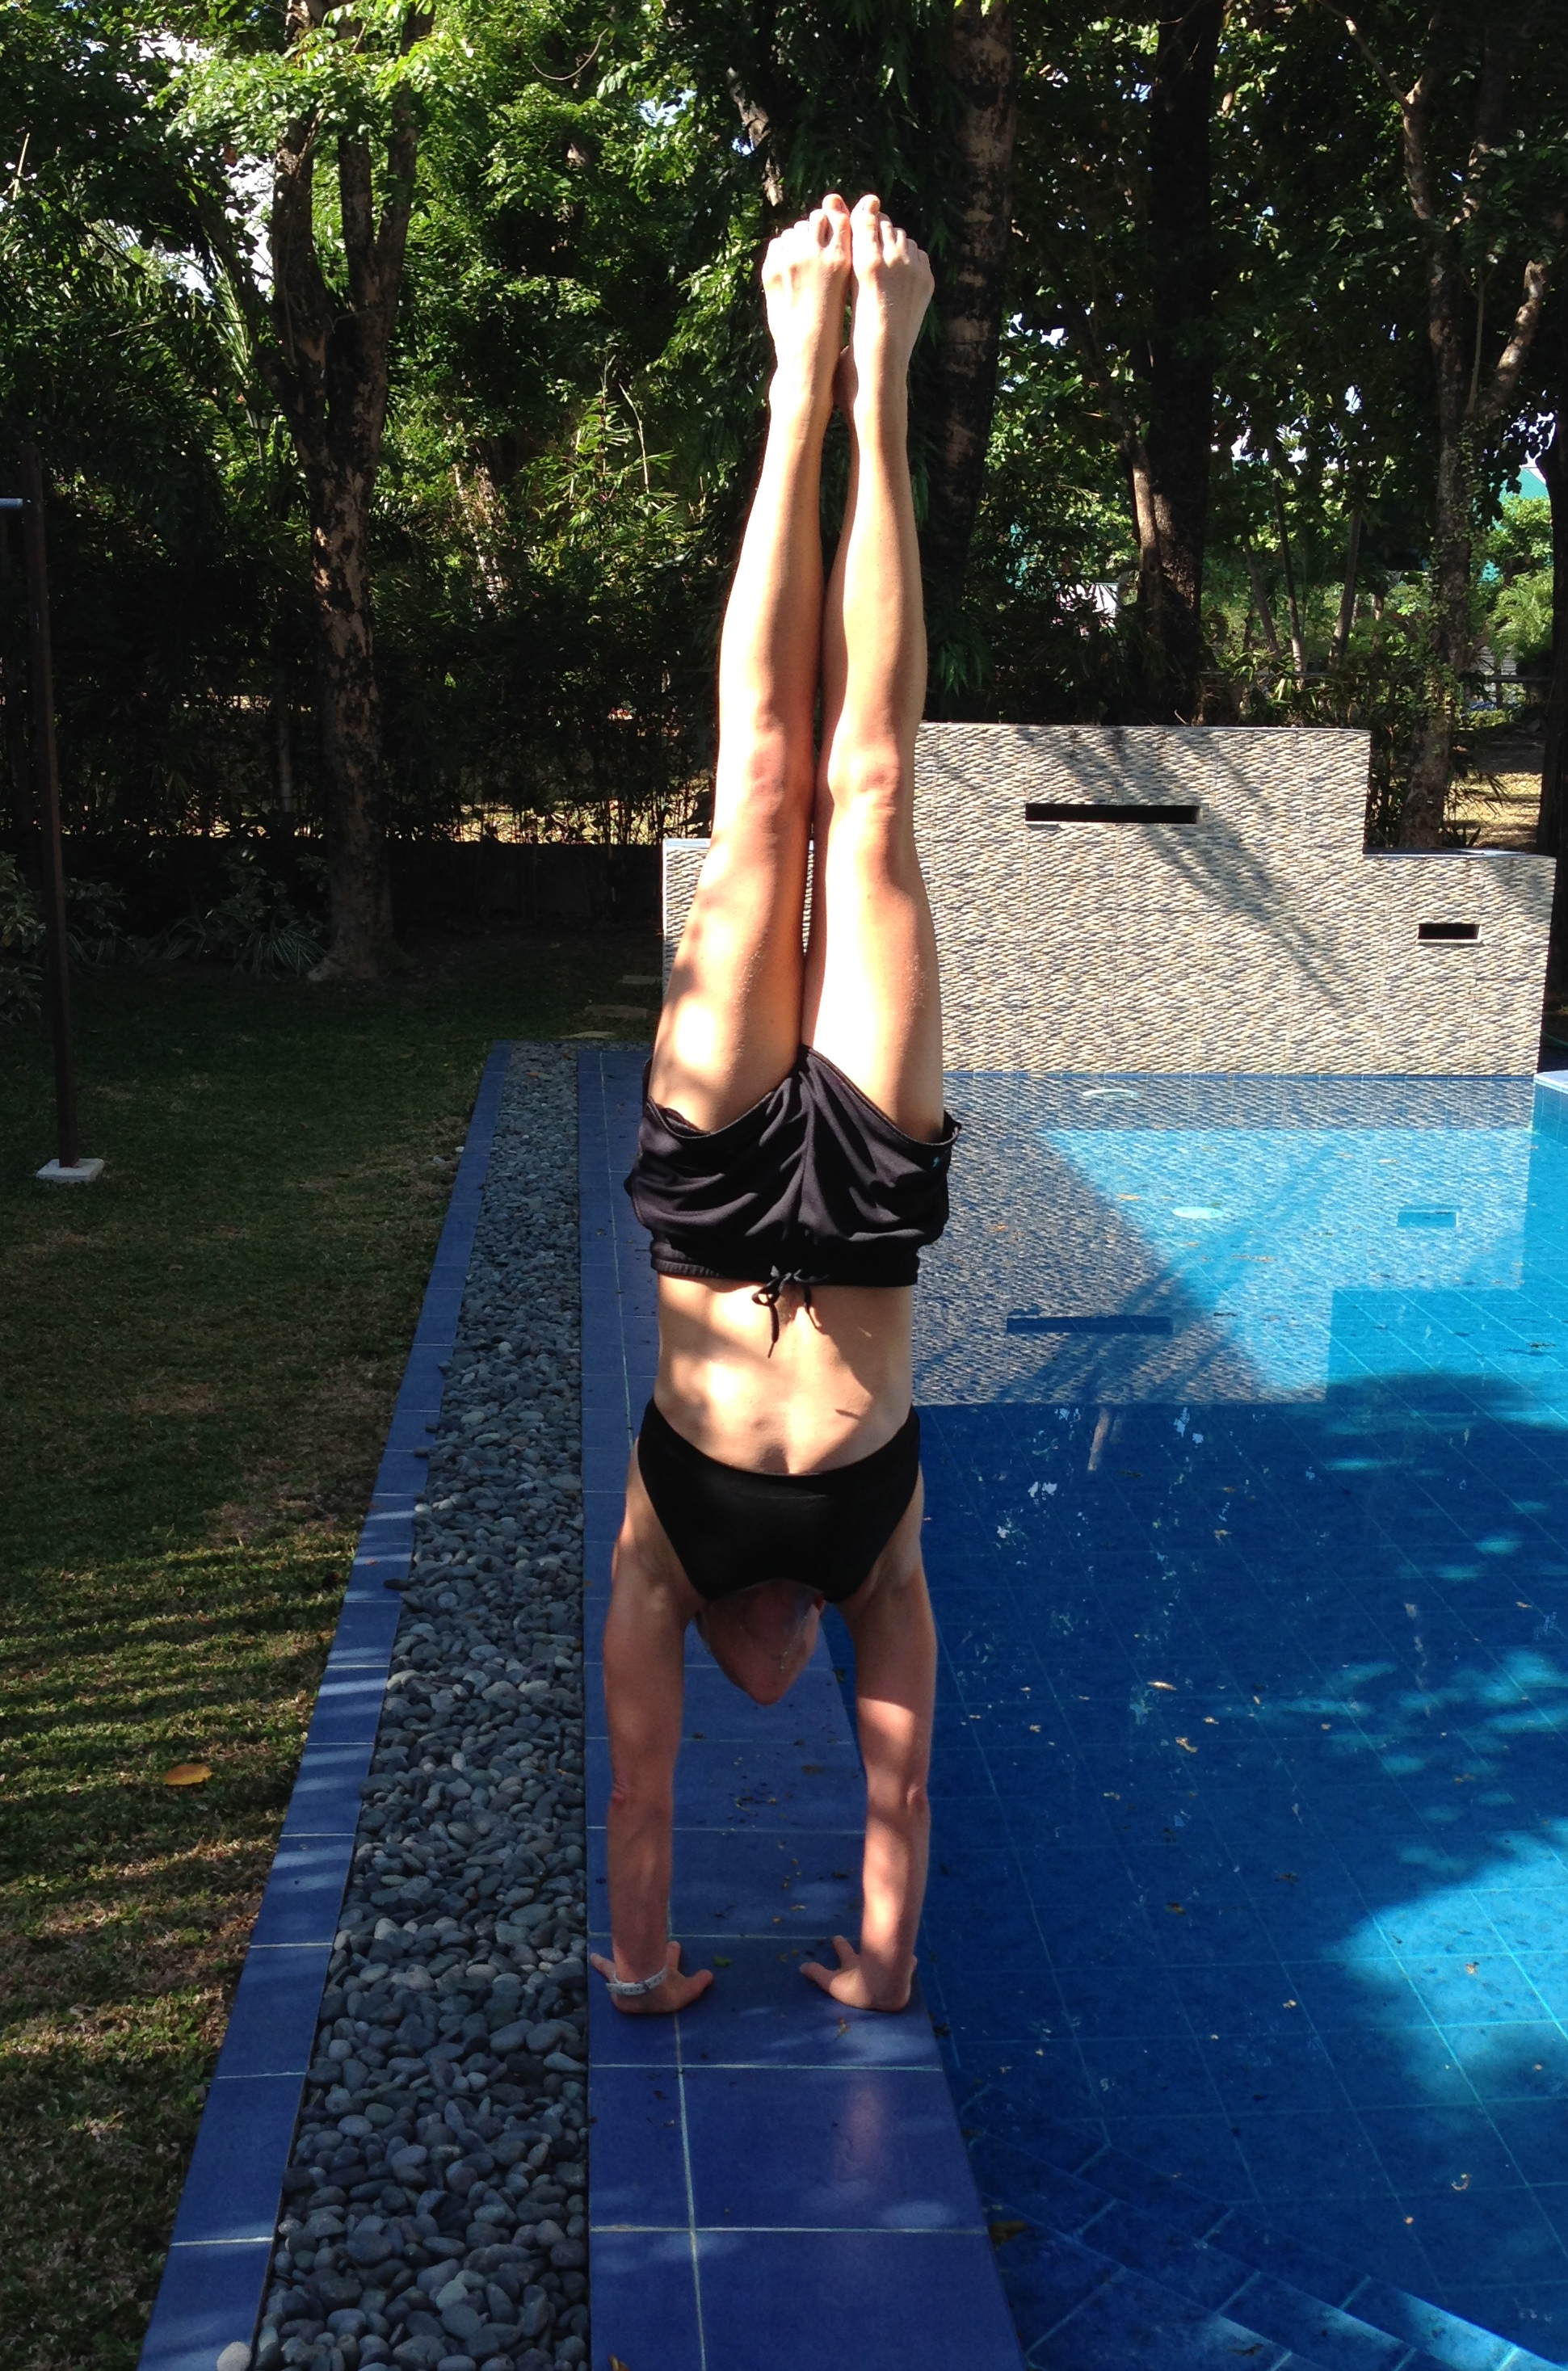 My daily handstand